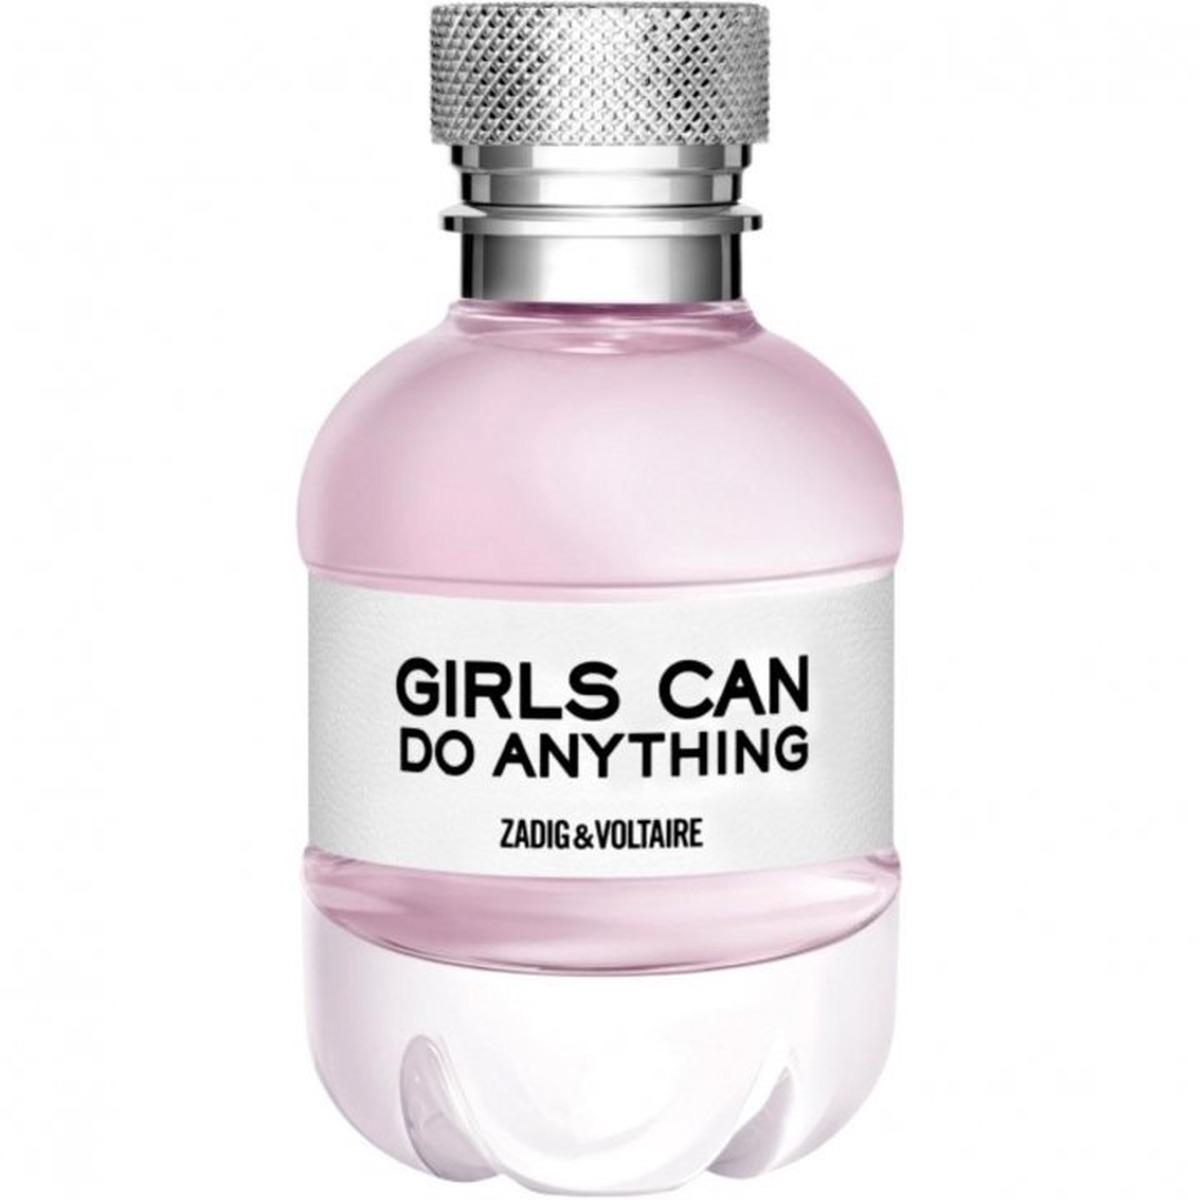 Girls can do anything 50 ml